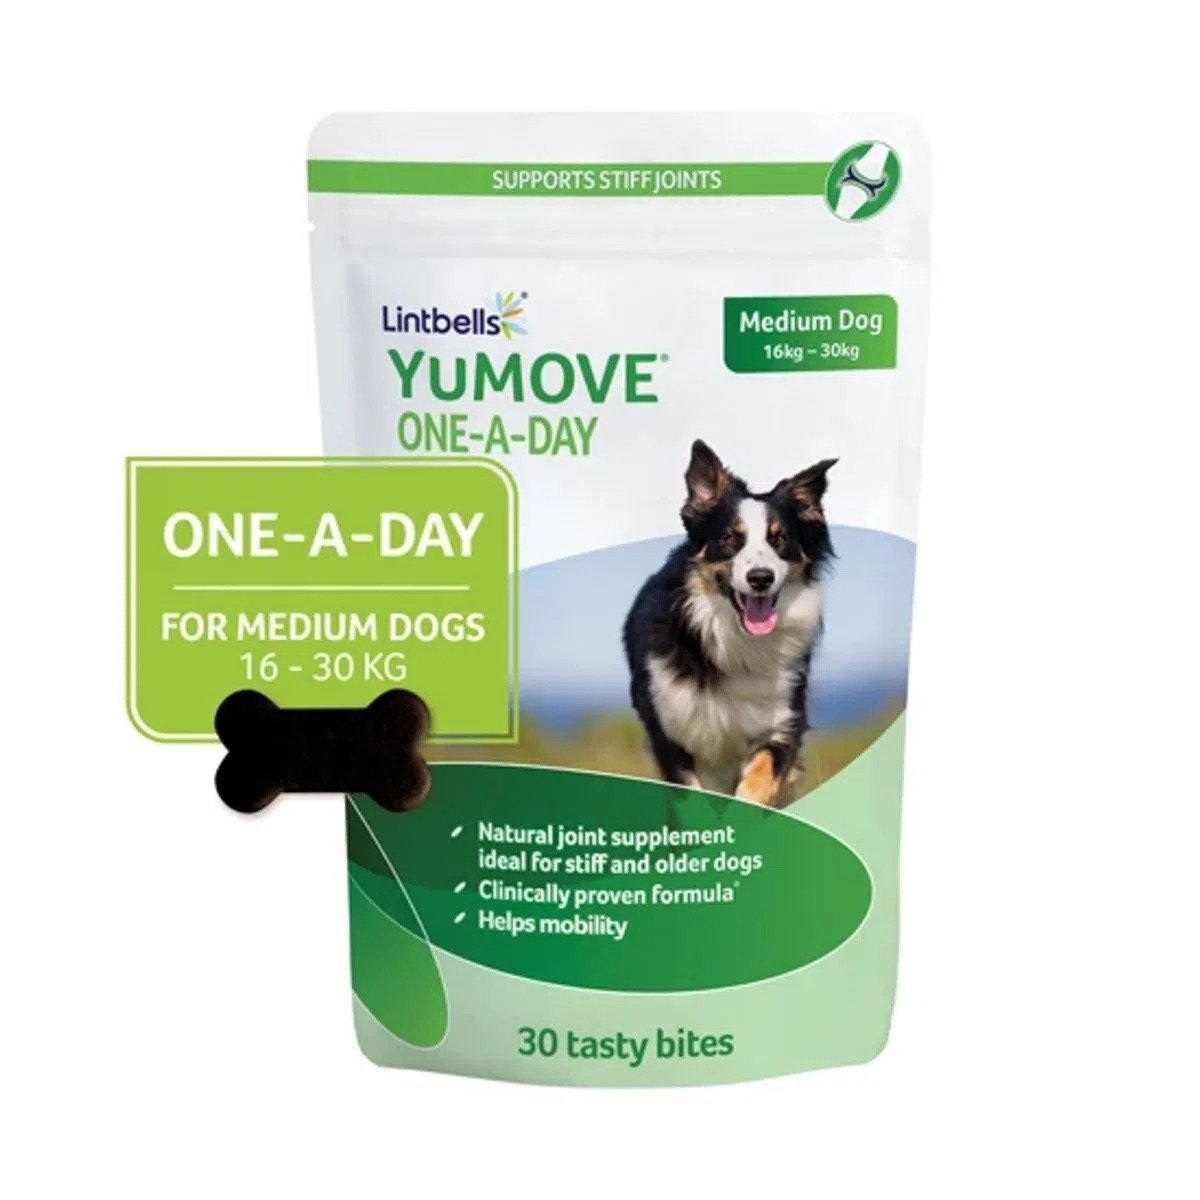 YuMOVE One-A-Day for Medium Dogs, 30 comprimate Lintbells imagine 2022